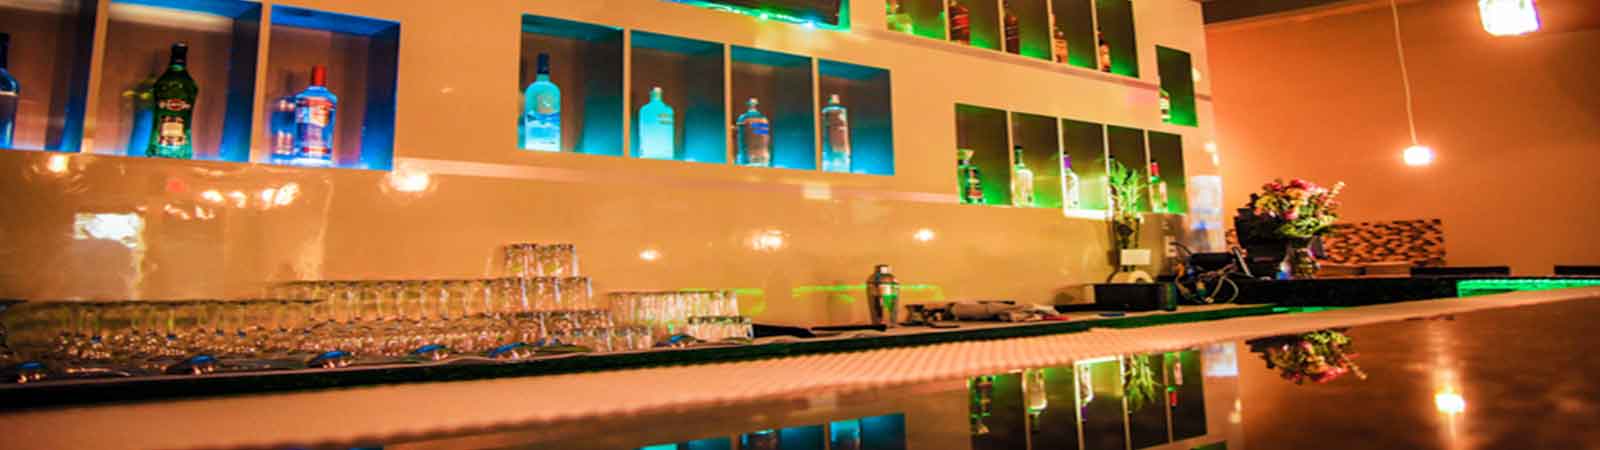 view of bar with liquor bottles